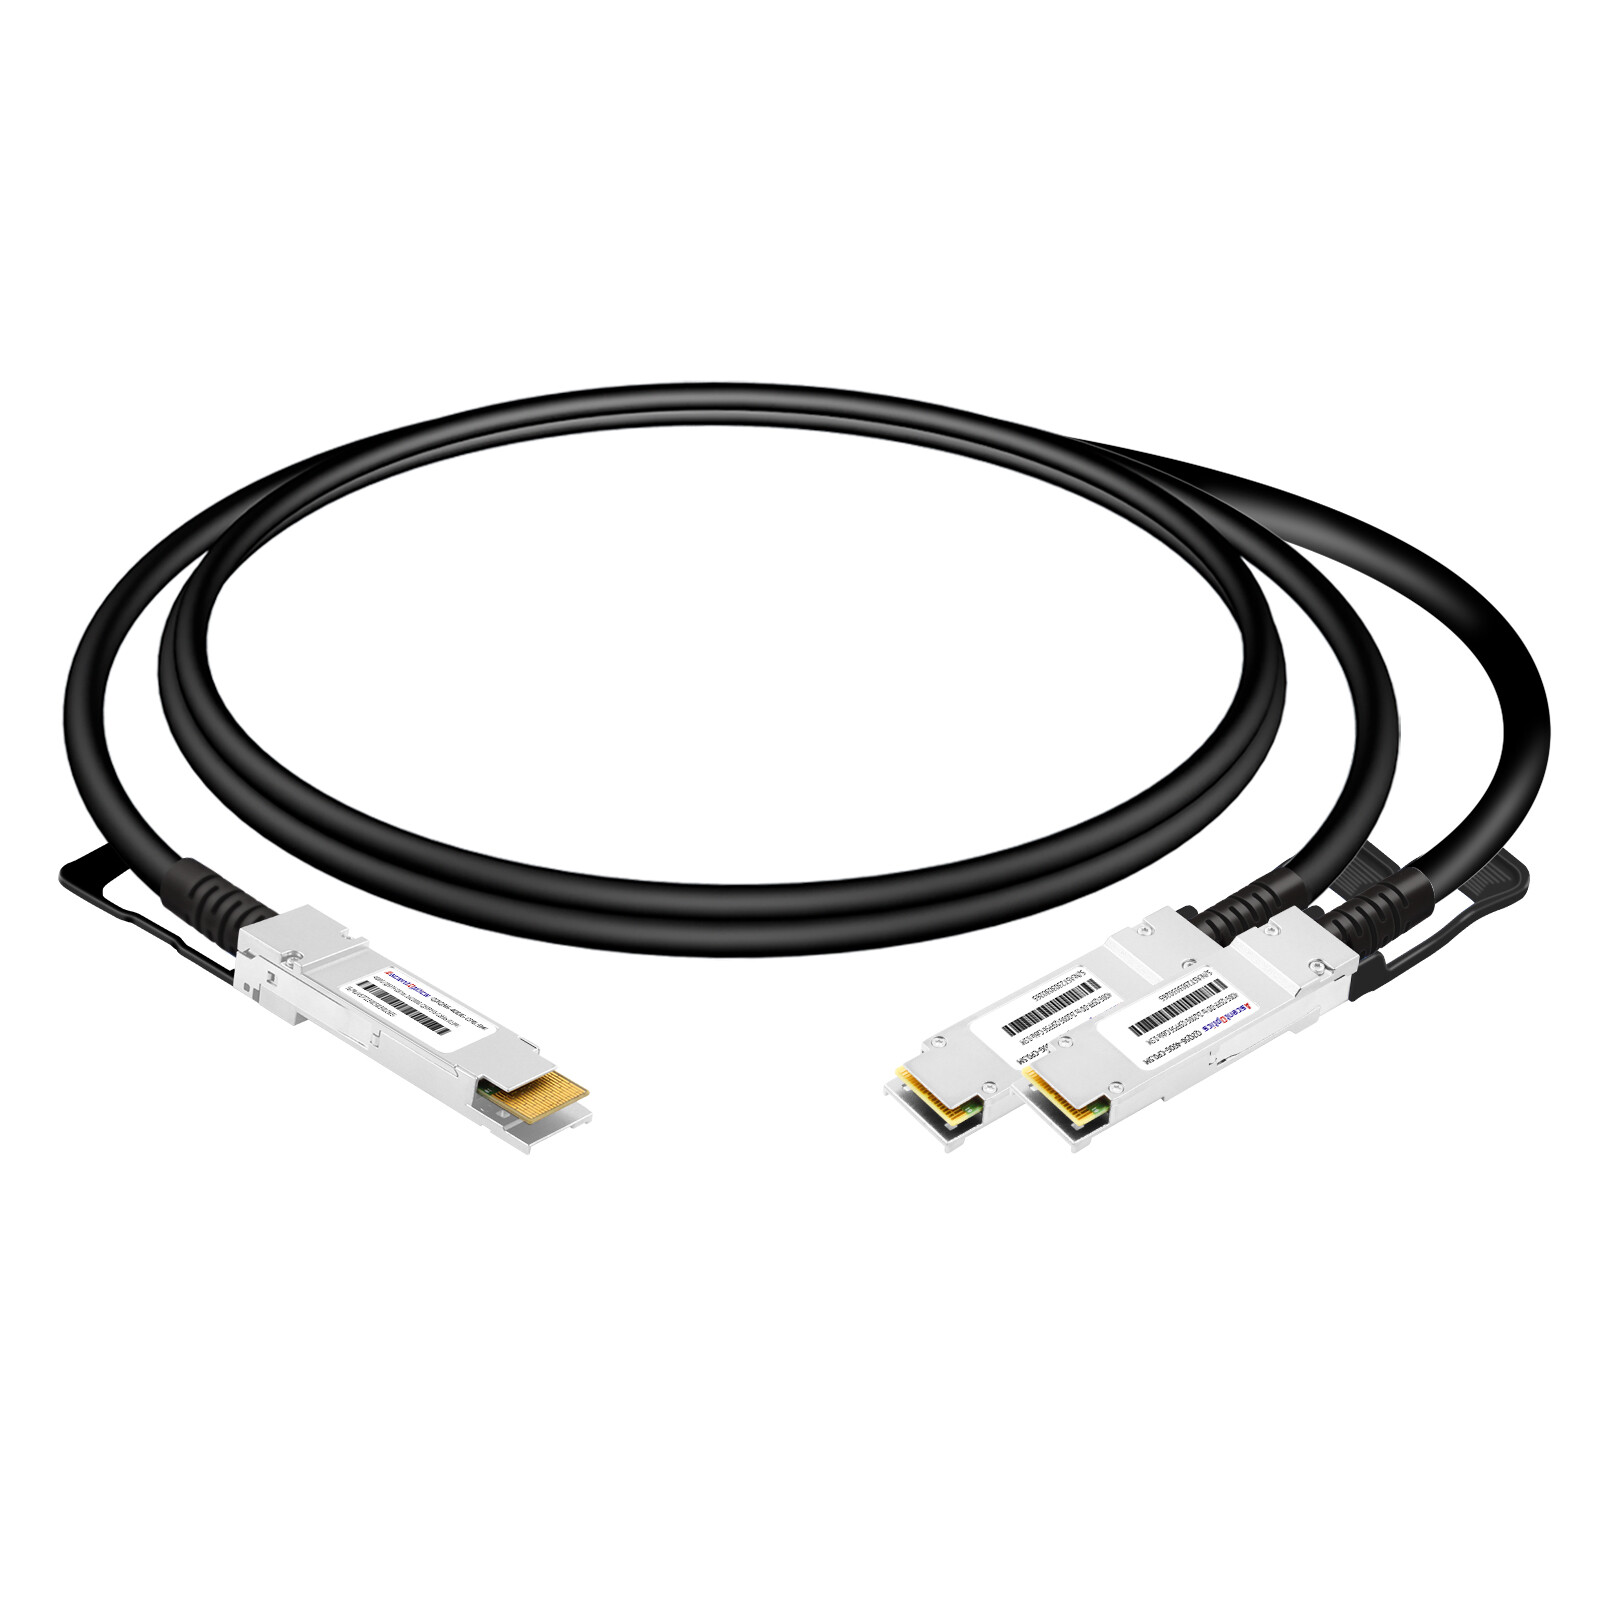 400G QSFP-DD to 4x 100G SFP-DD Copper Breakout Cable,2 Meters,Passive